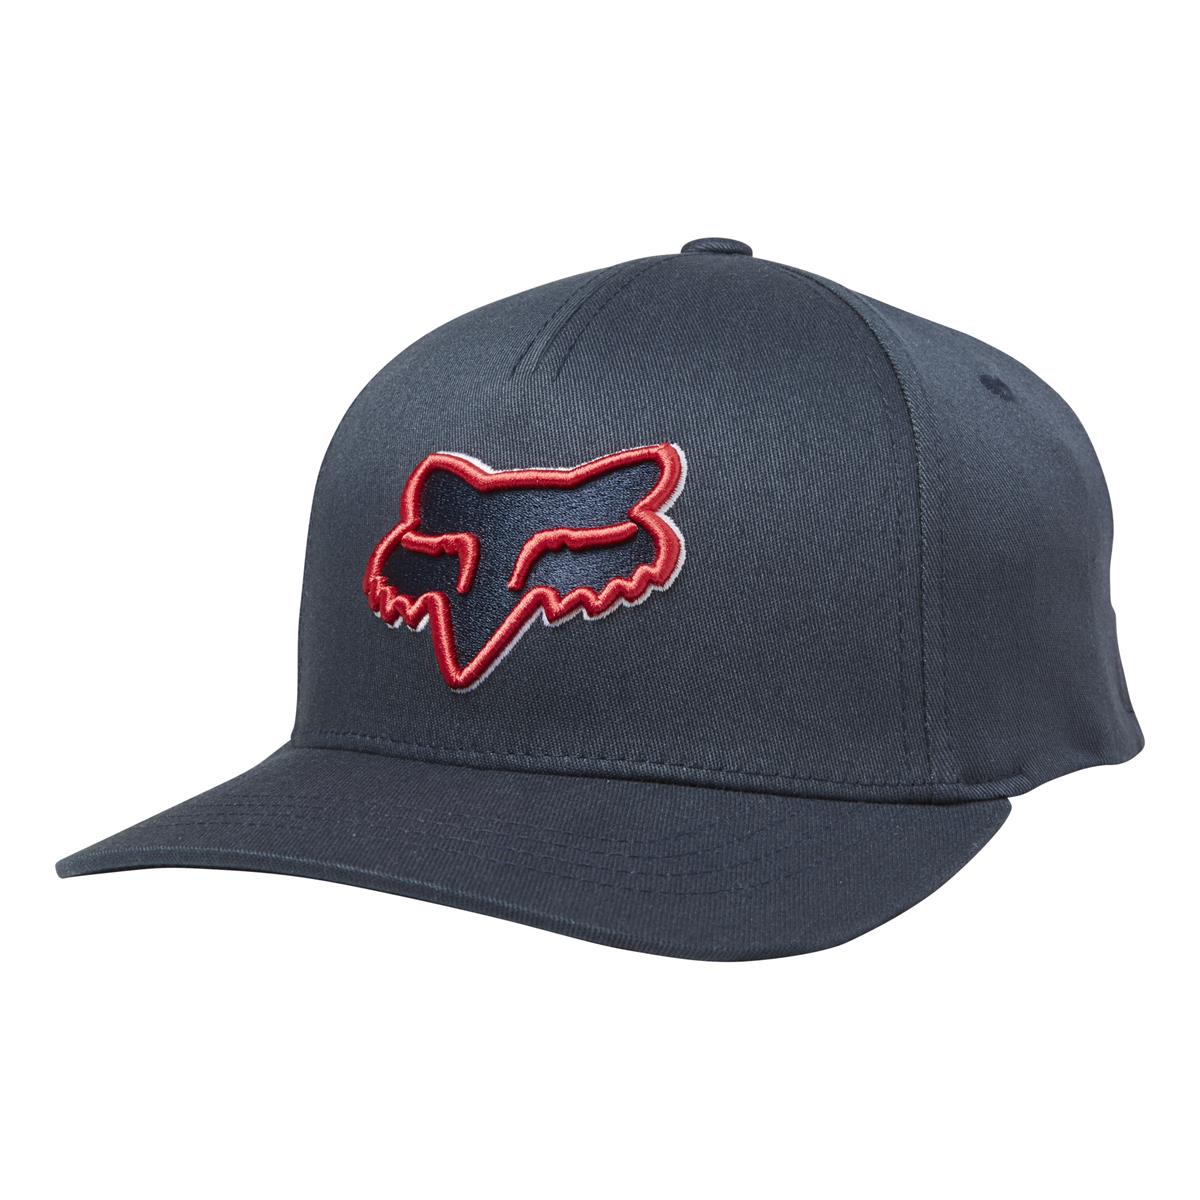 Fox Enfant Casquette Snapback Epicycle 110 Navy/Red